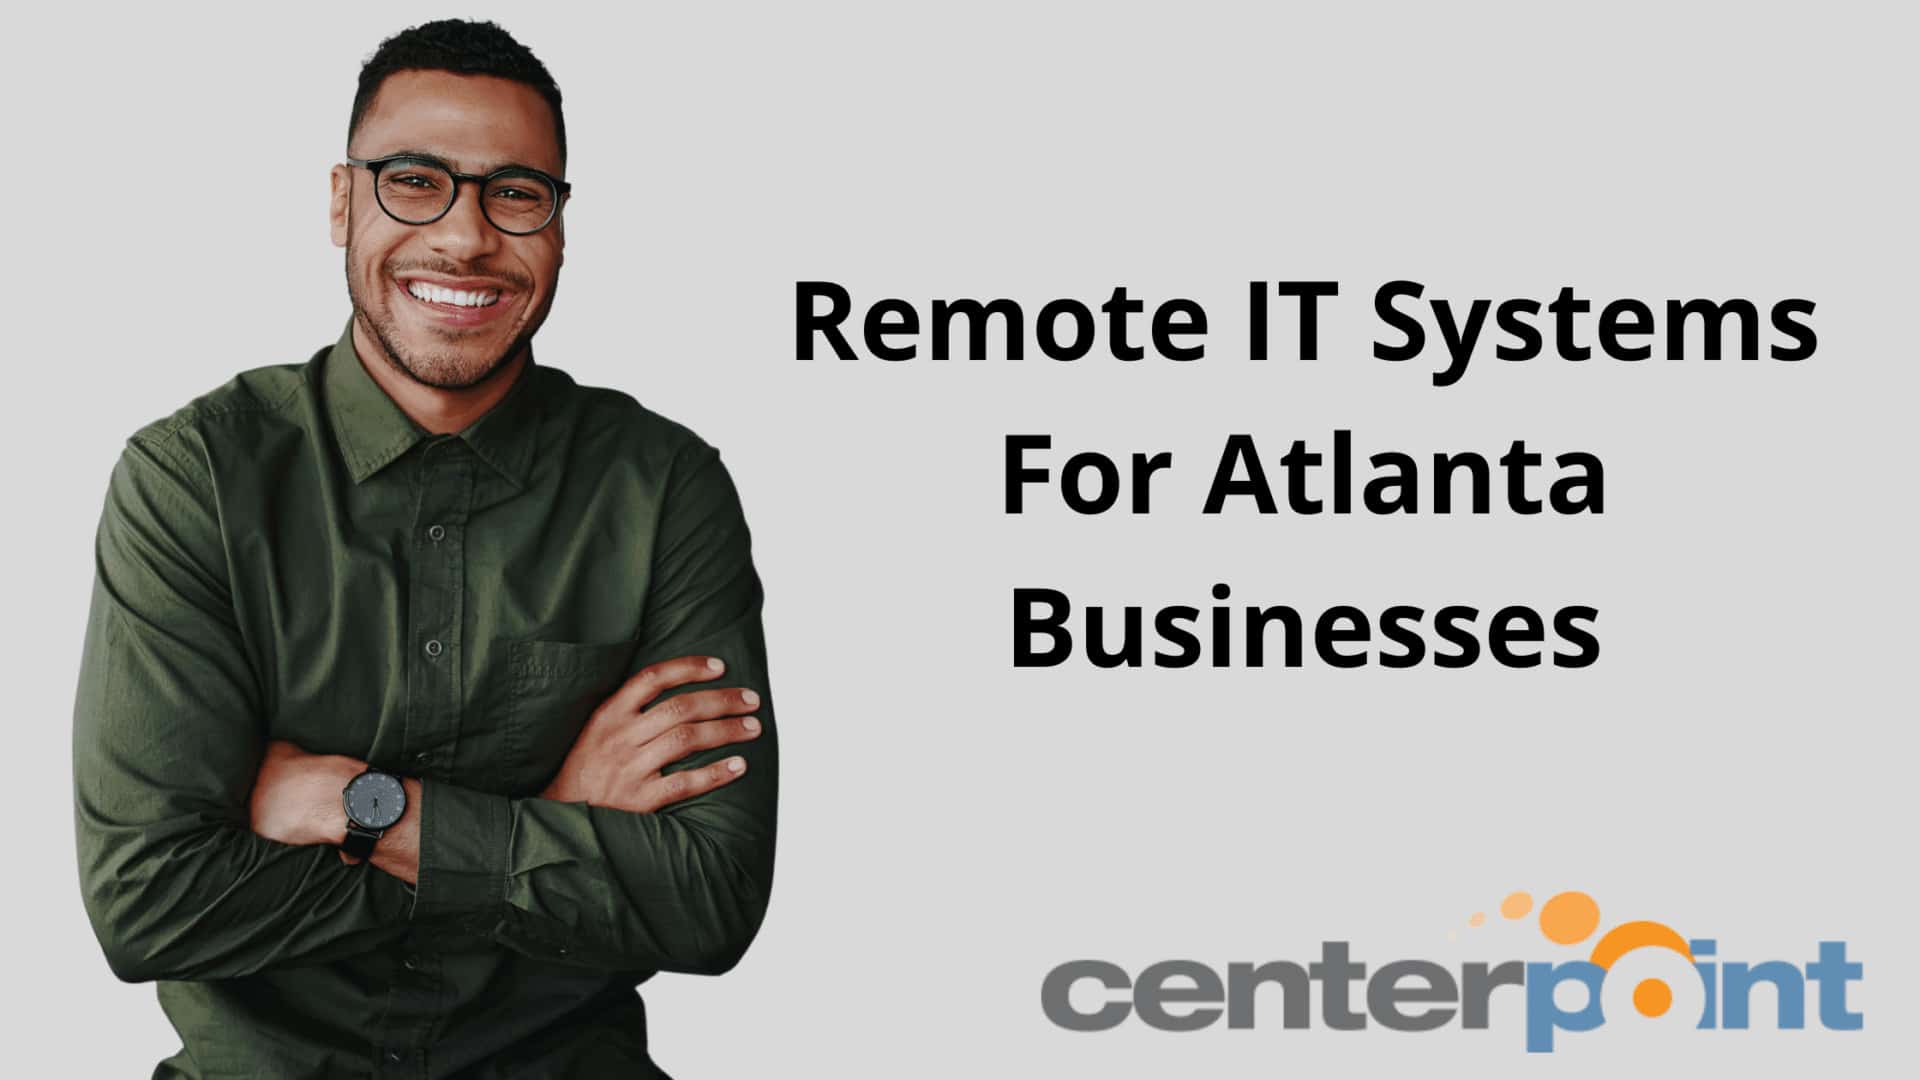 Remote IT Systems For Atlanta Businesses (1)